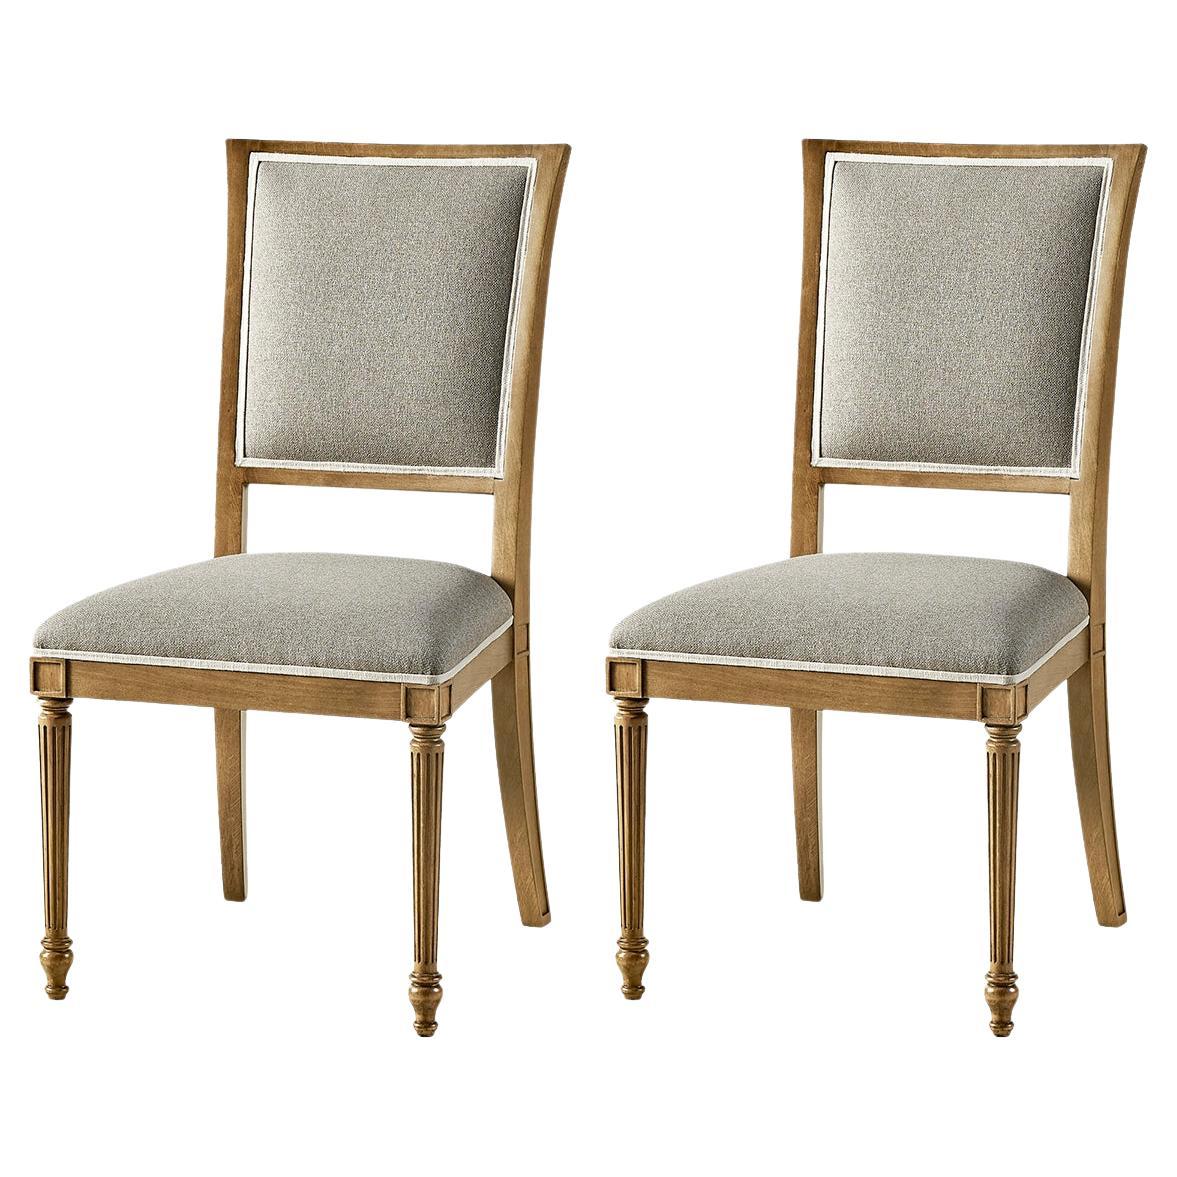 Classic French Dining Chairs in Cherry Finish For Sale